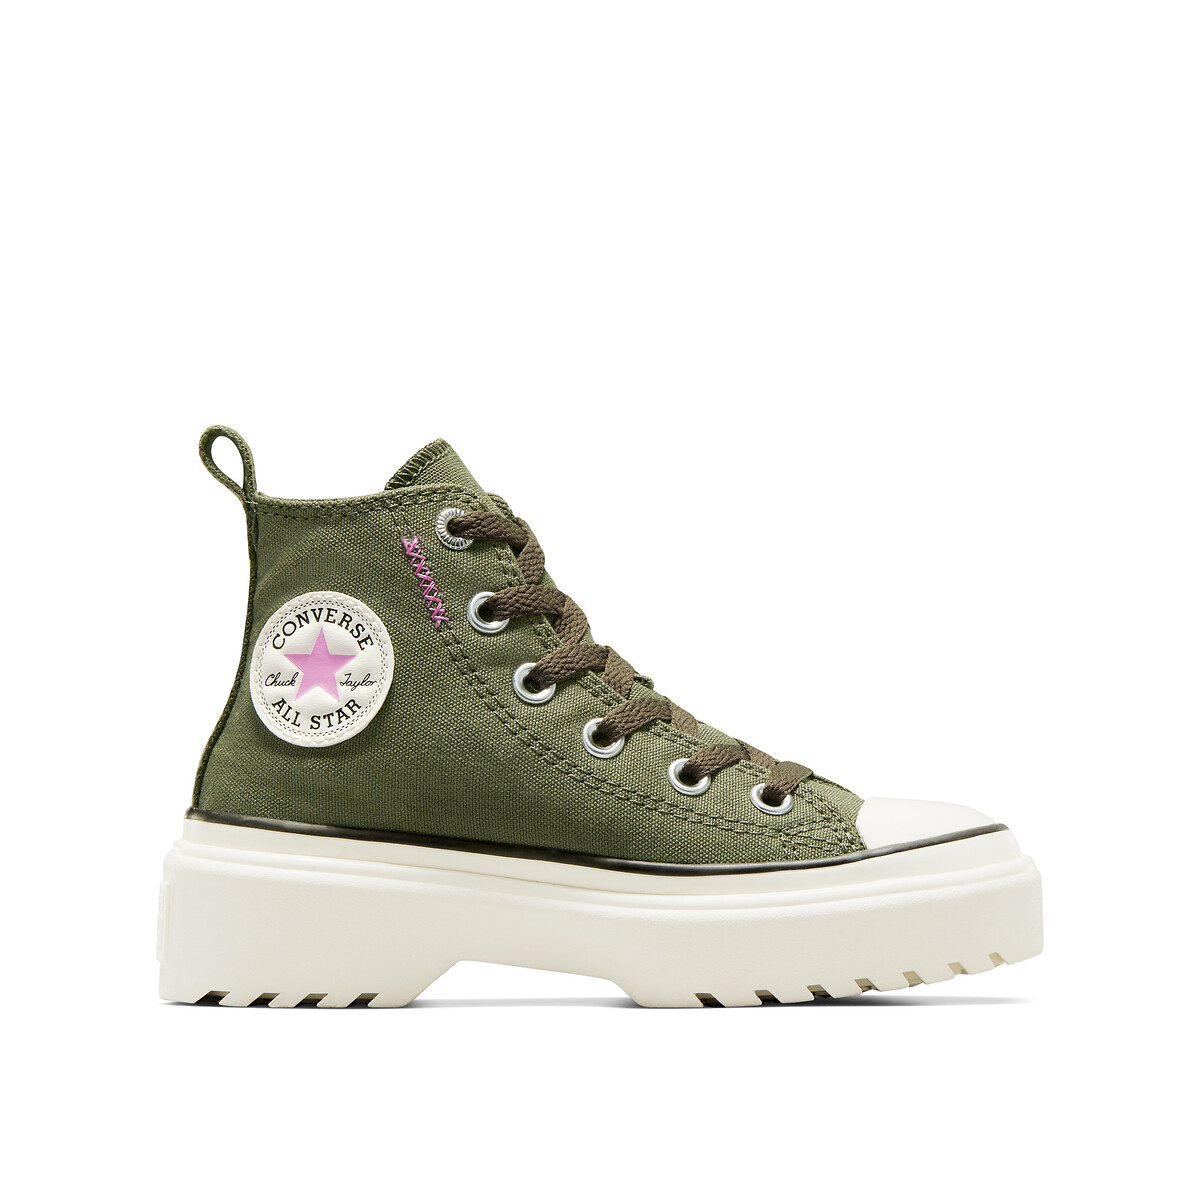 Sneakers CTAS Lugged Lift Hi Craft Remastered von Converse